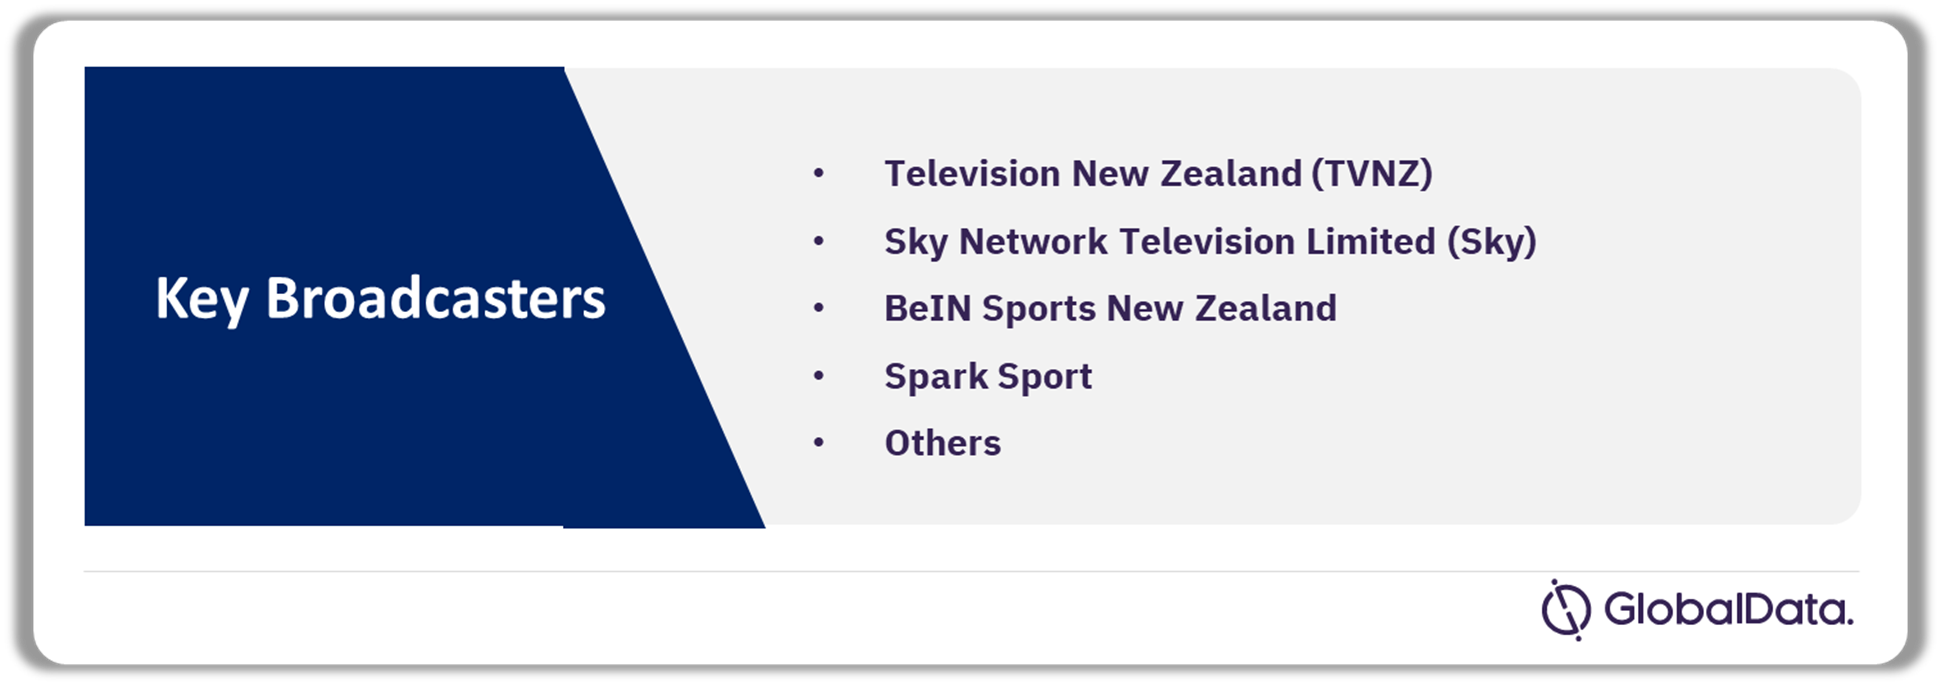 New Zealand Sports Broadcasting Media Market Analysis, by Broadcasters